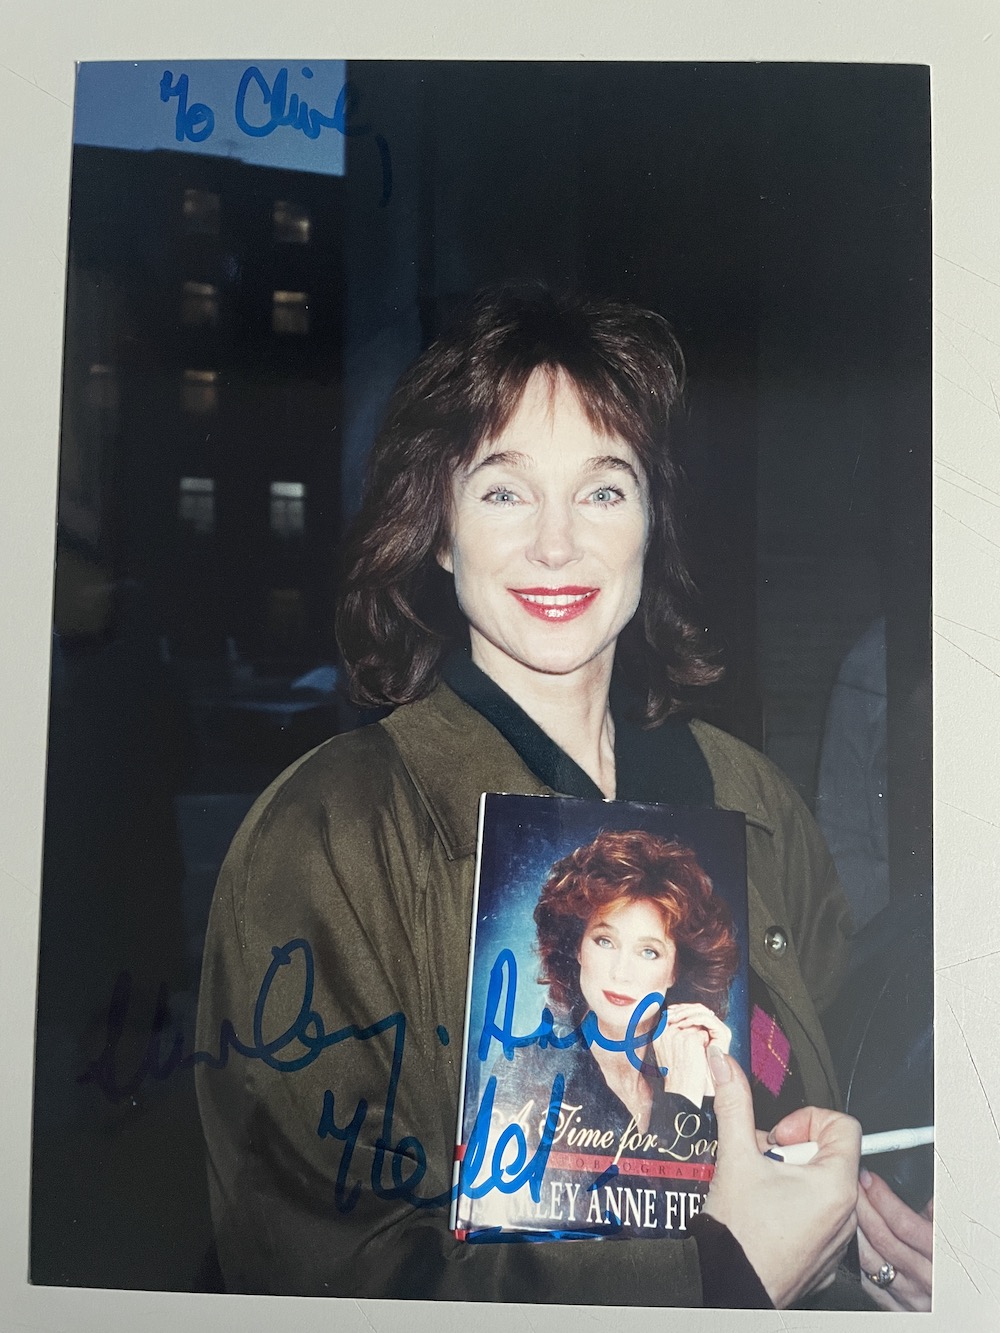 Shirley Anne Field Popular British Actress 8x6 inch signed photo. Good condition. All autographs